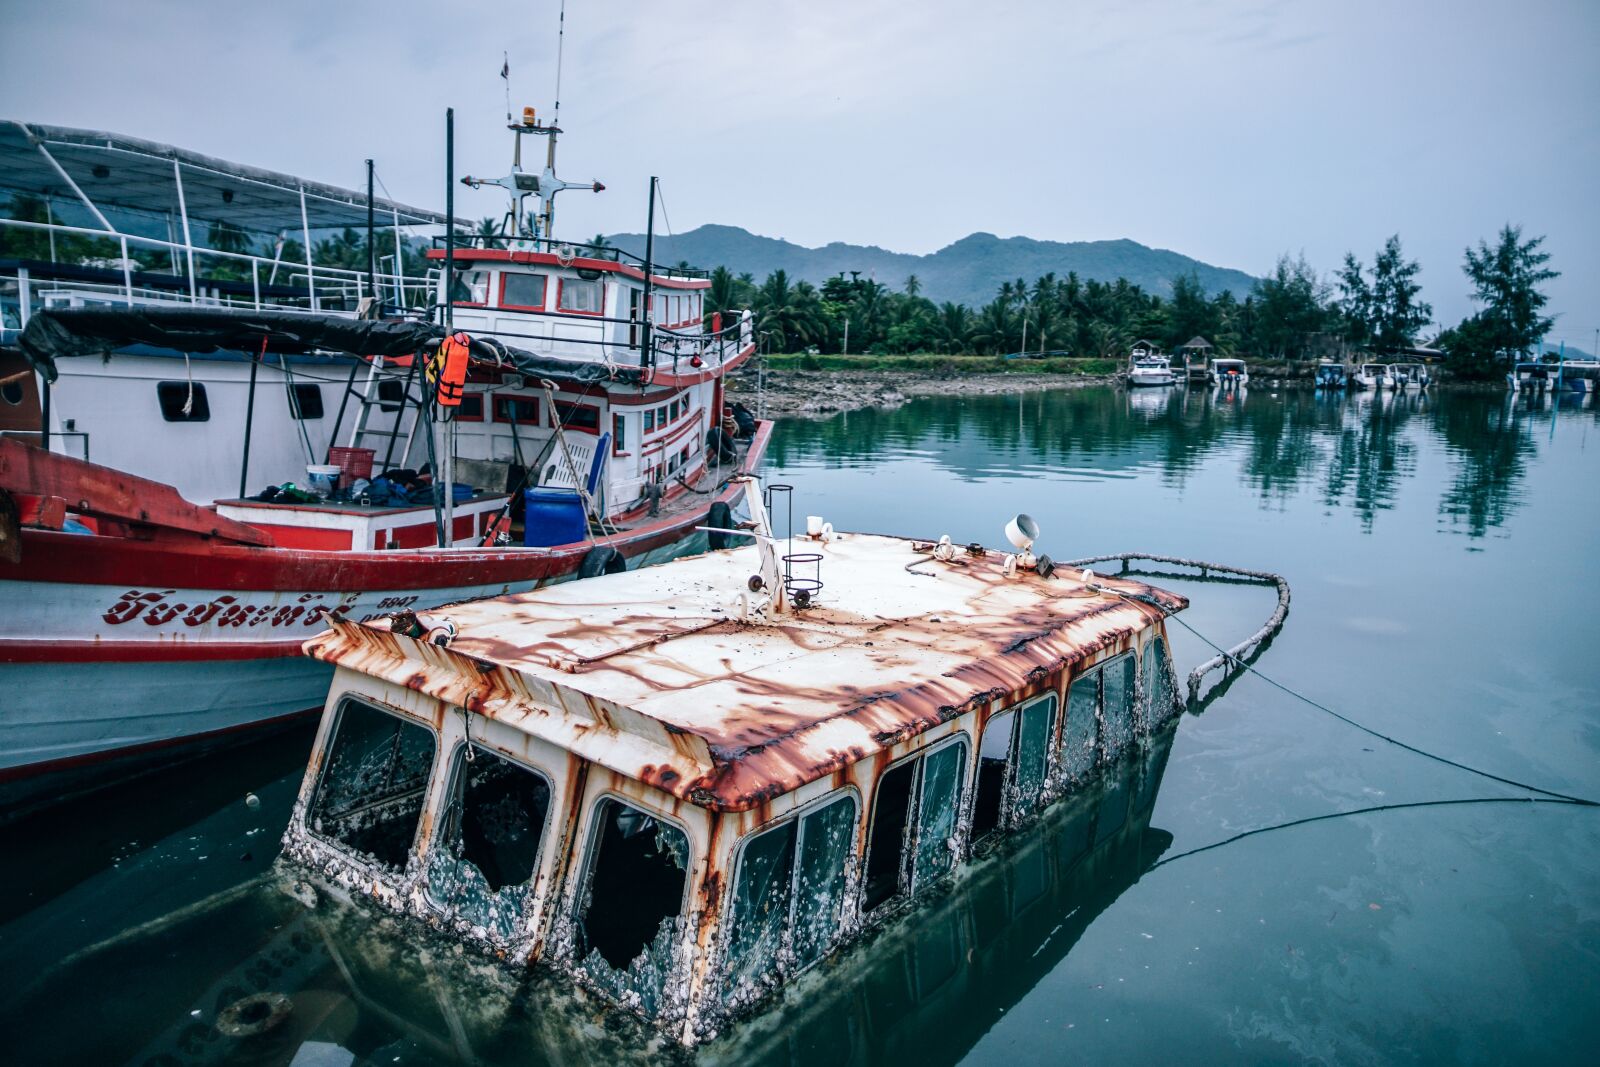 Sony a7 II sample photo. Harbor, boat, water photography